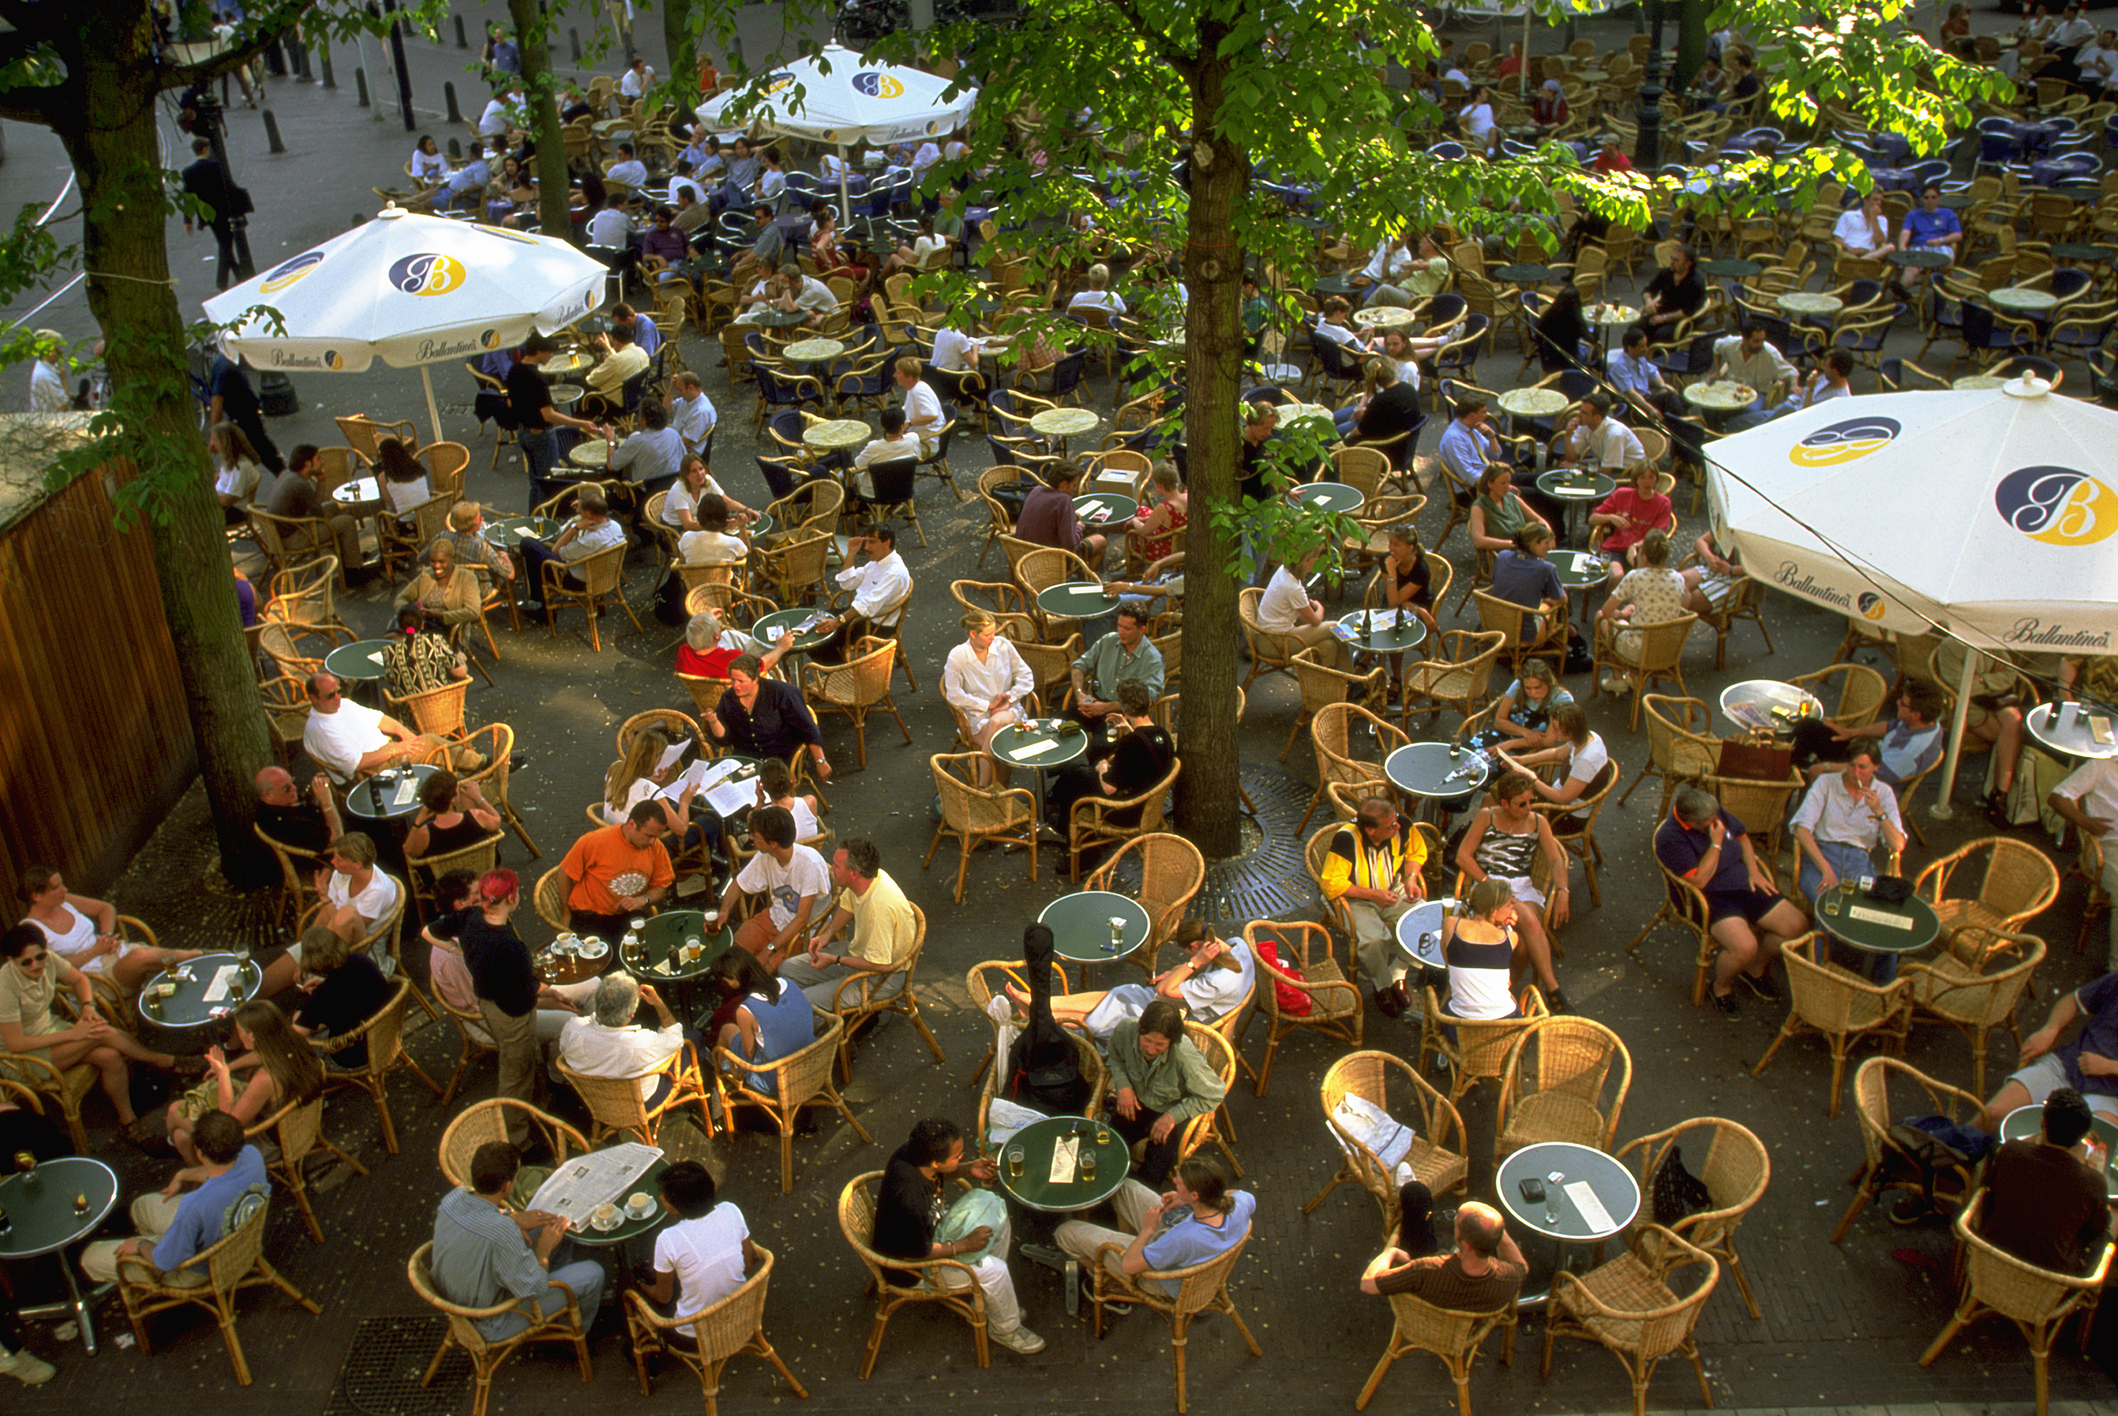 Outdoor café scene with numerous guests seated at tables under trees